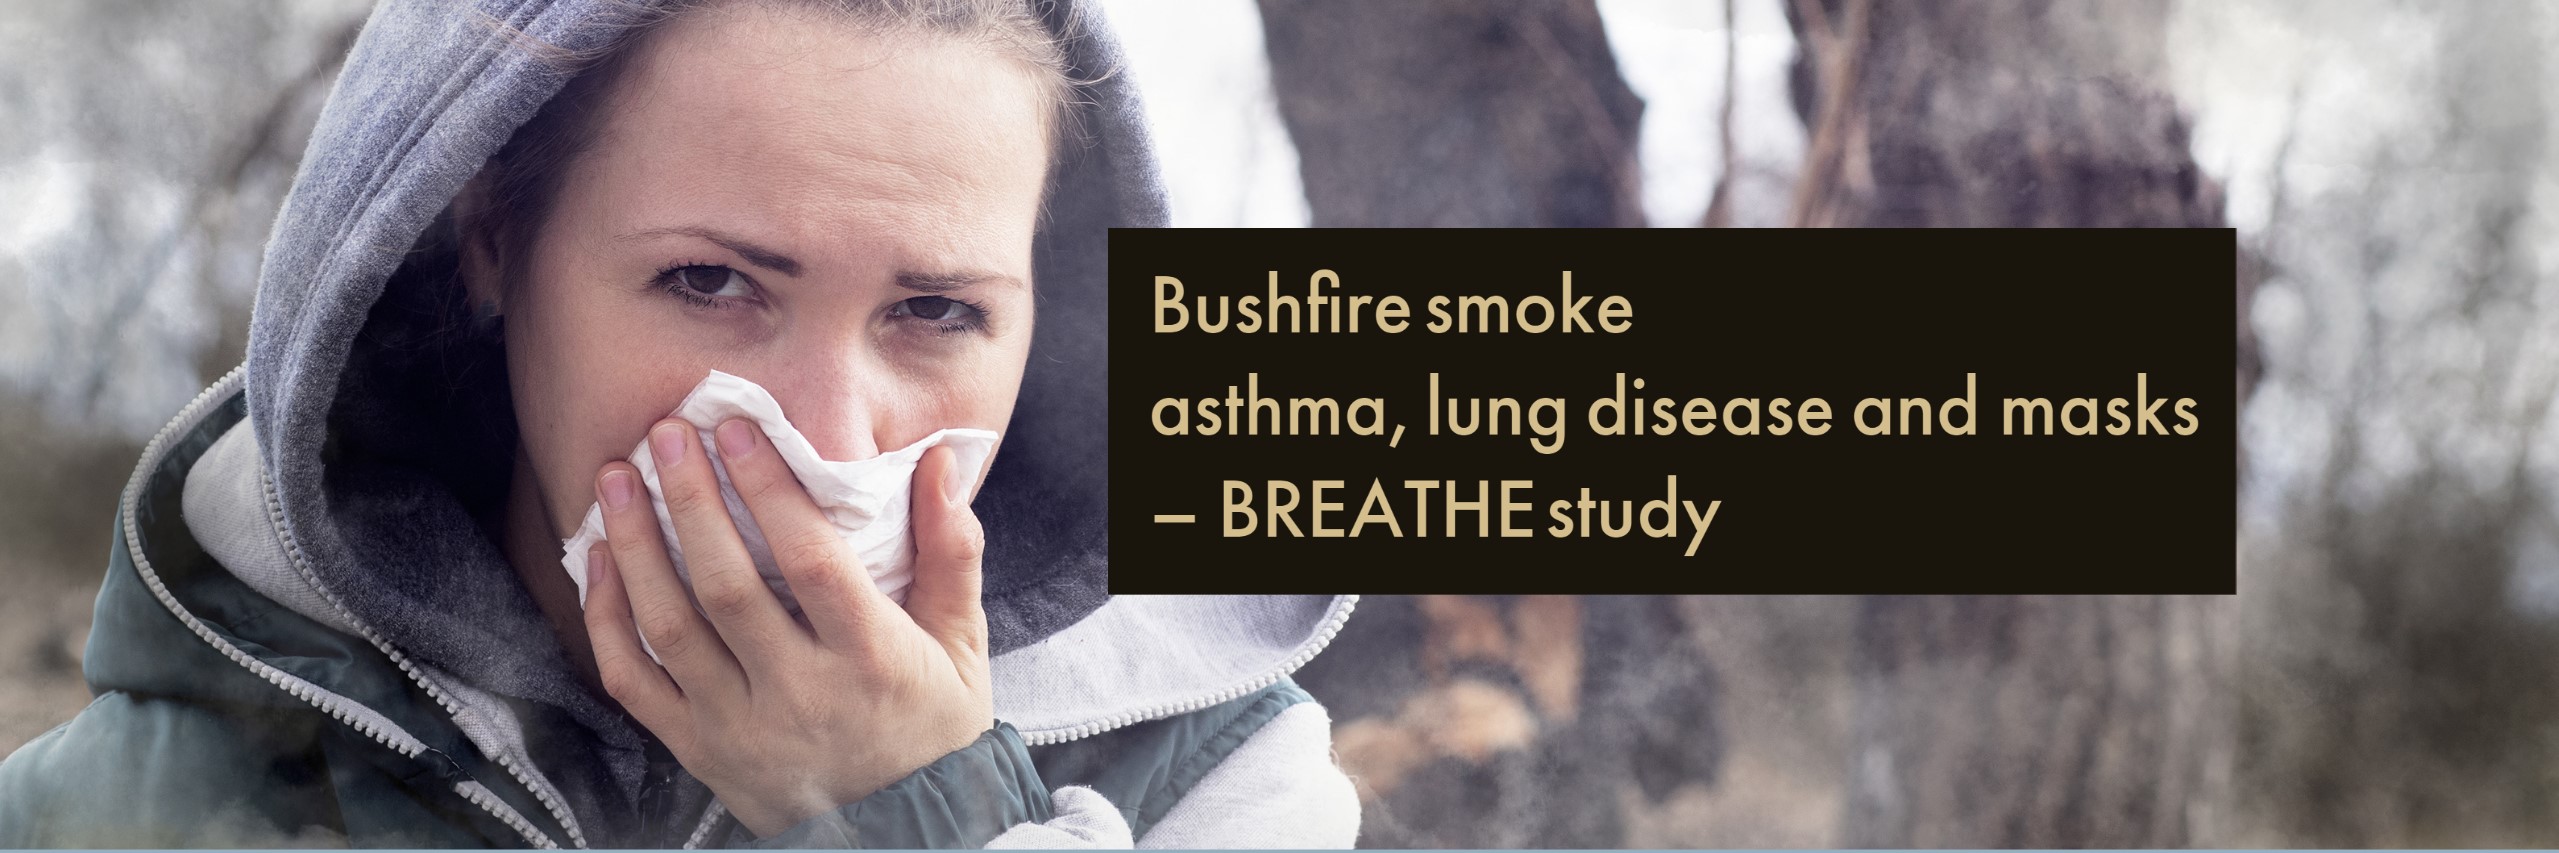 Bushfire smoke, asthma, lung disease and masks – BREATHE, a new research study this summer